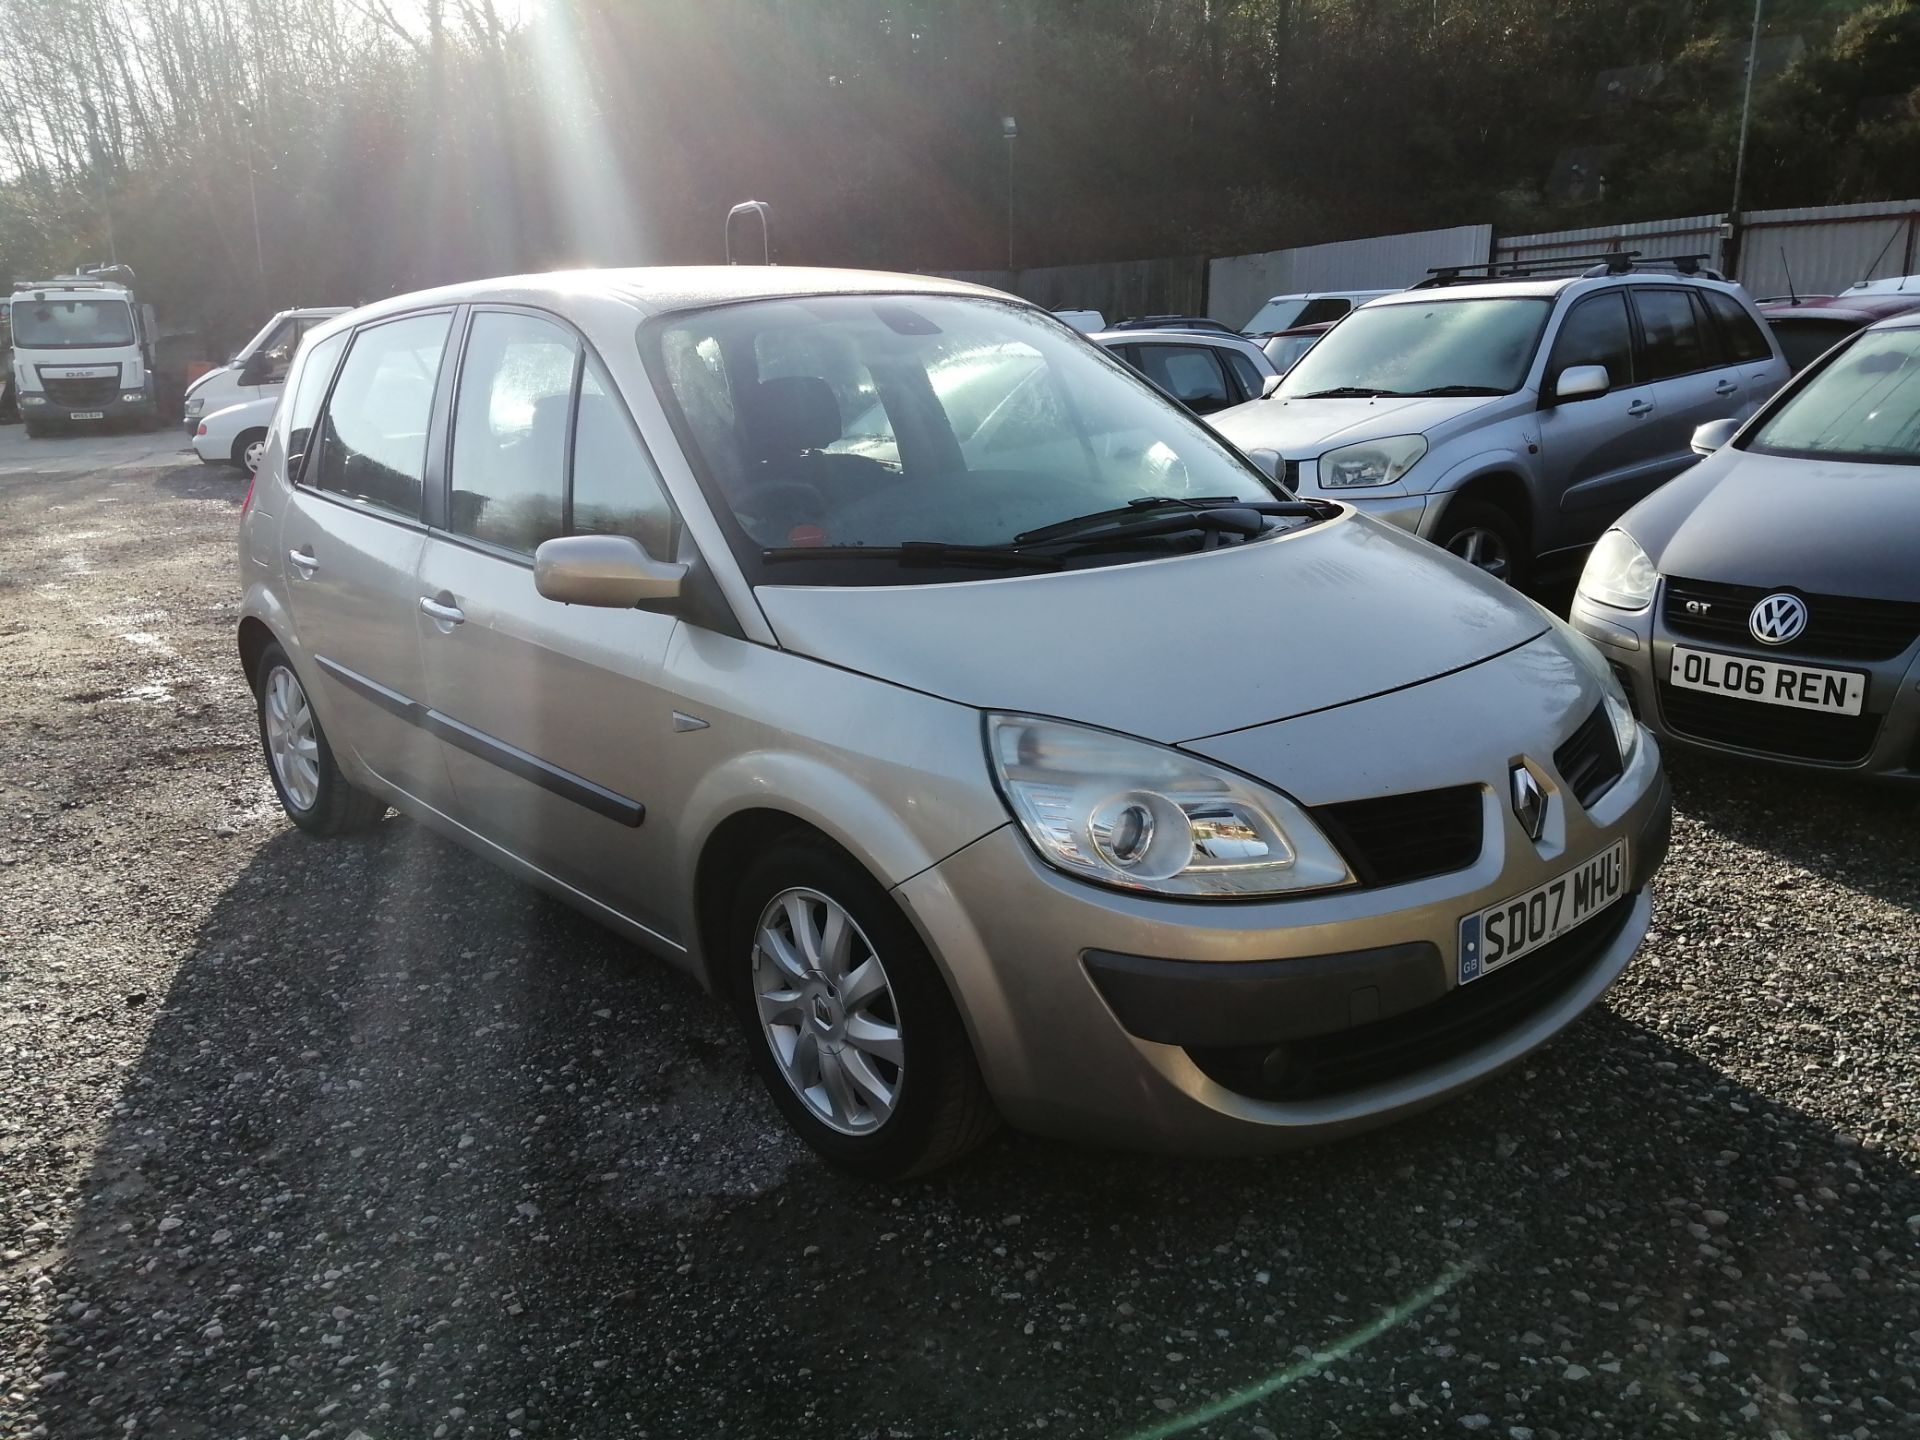 07/07 RENAULT SCENIC DYN VVT - 1598cc 5dr MPV (Gold) - Image 2 of 12